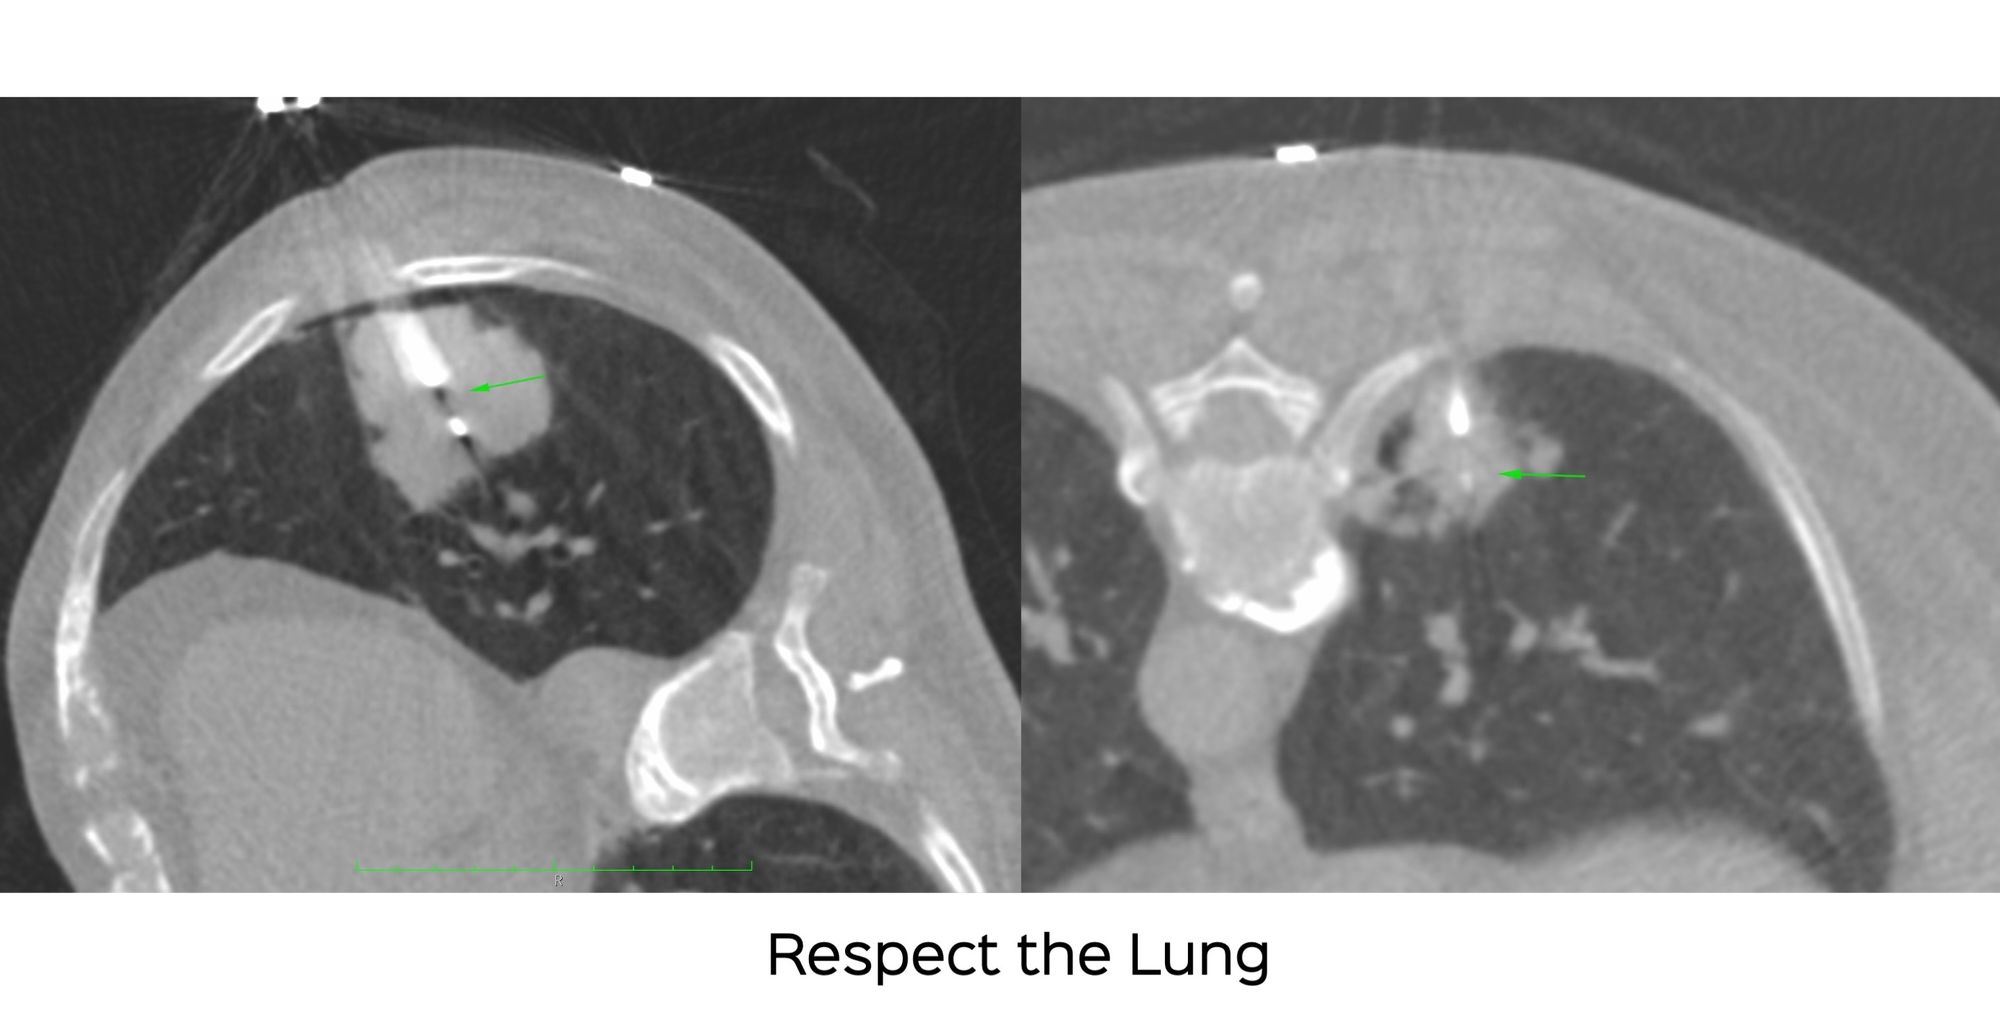 Case 8: Respect the Lung - A Tale of Two Biopsies and Complications